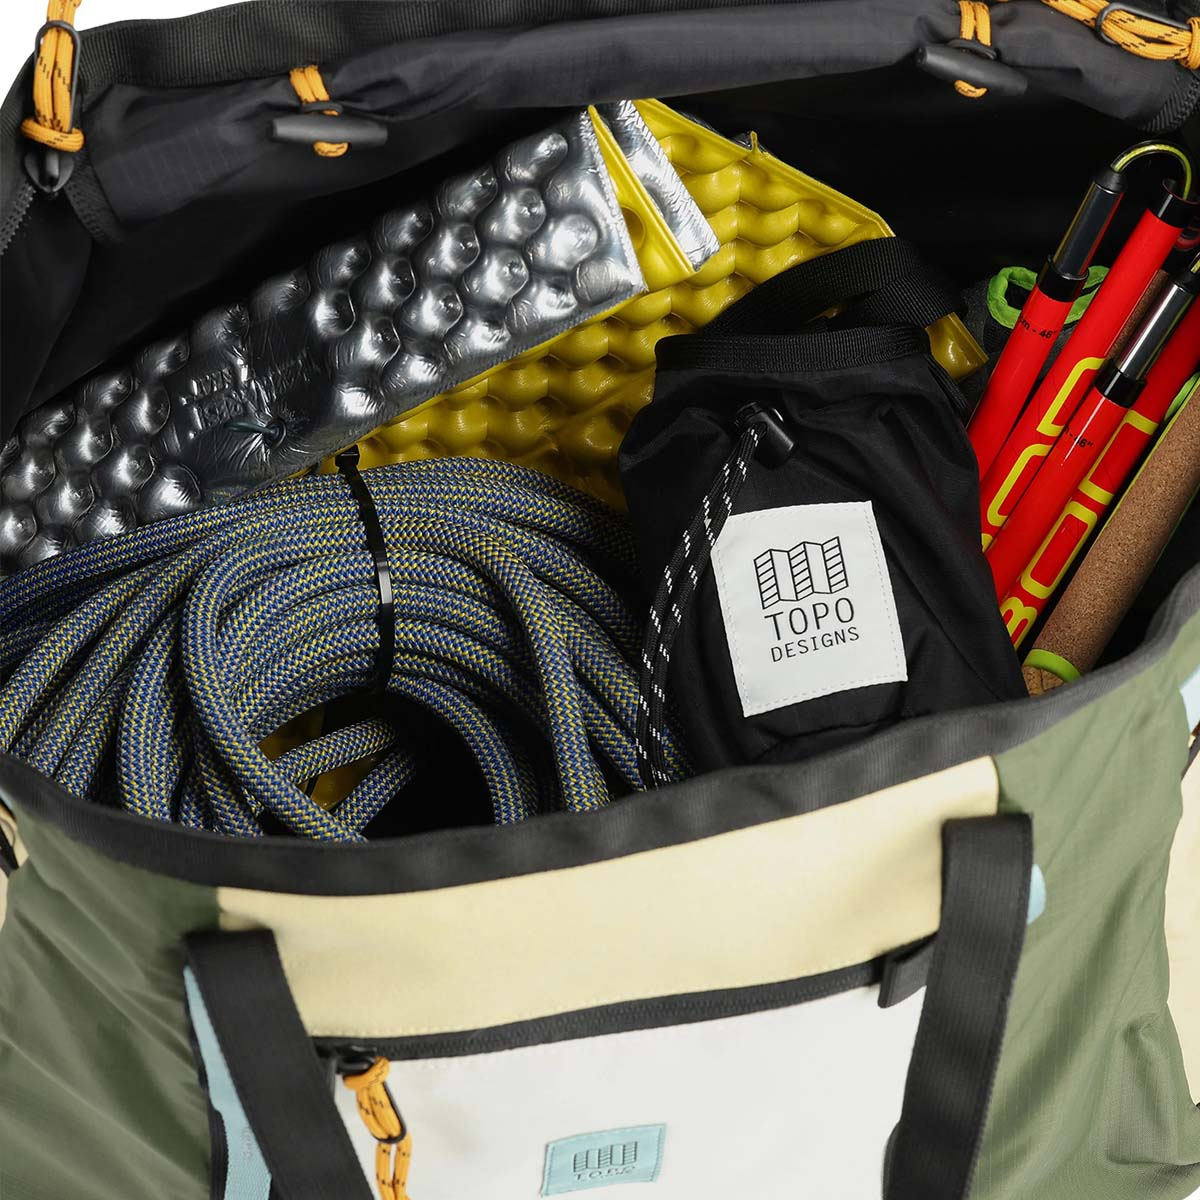 Topo Designs Mountain Gear Bag, Get all your gear together, throw it in your Gear Bag and go!